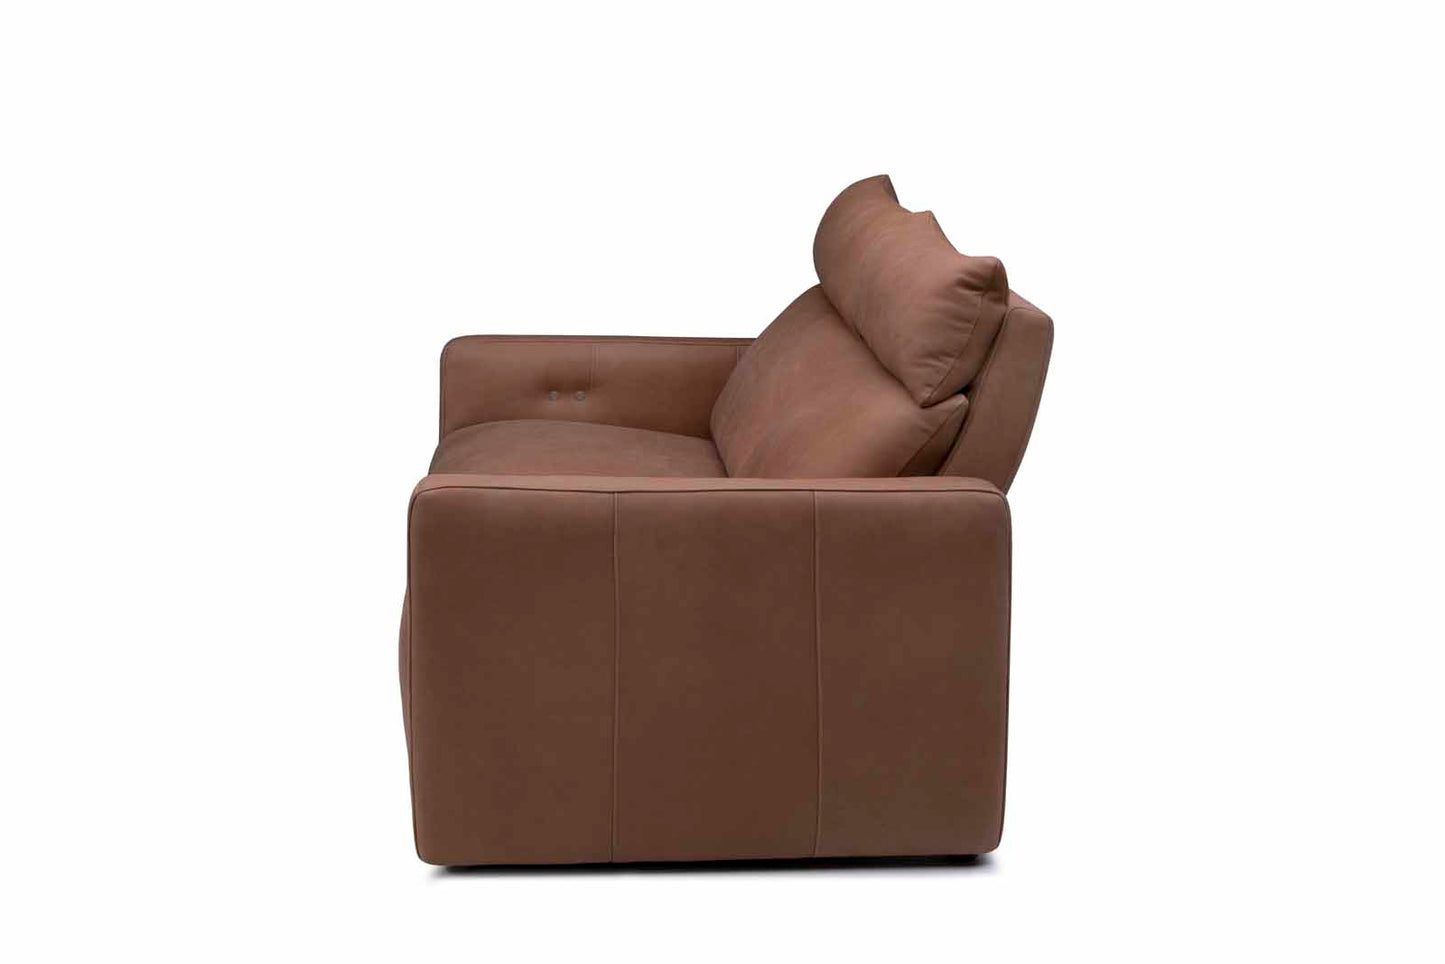 Halle 2-Seat Sofa in Camel Leather